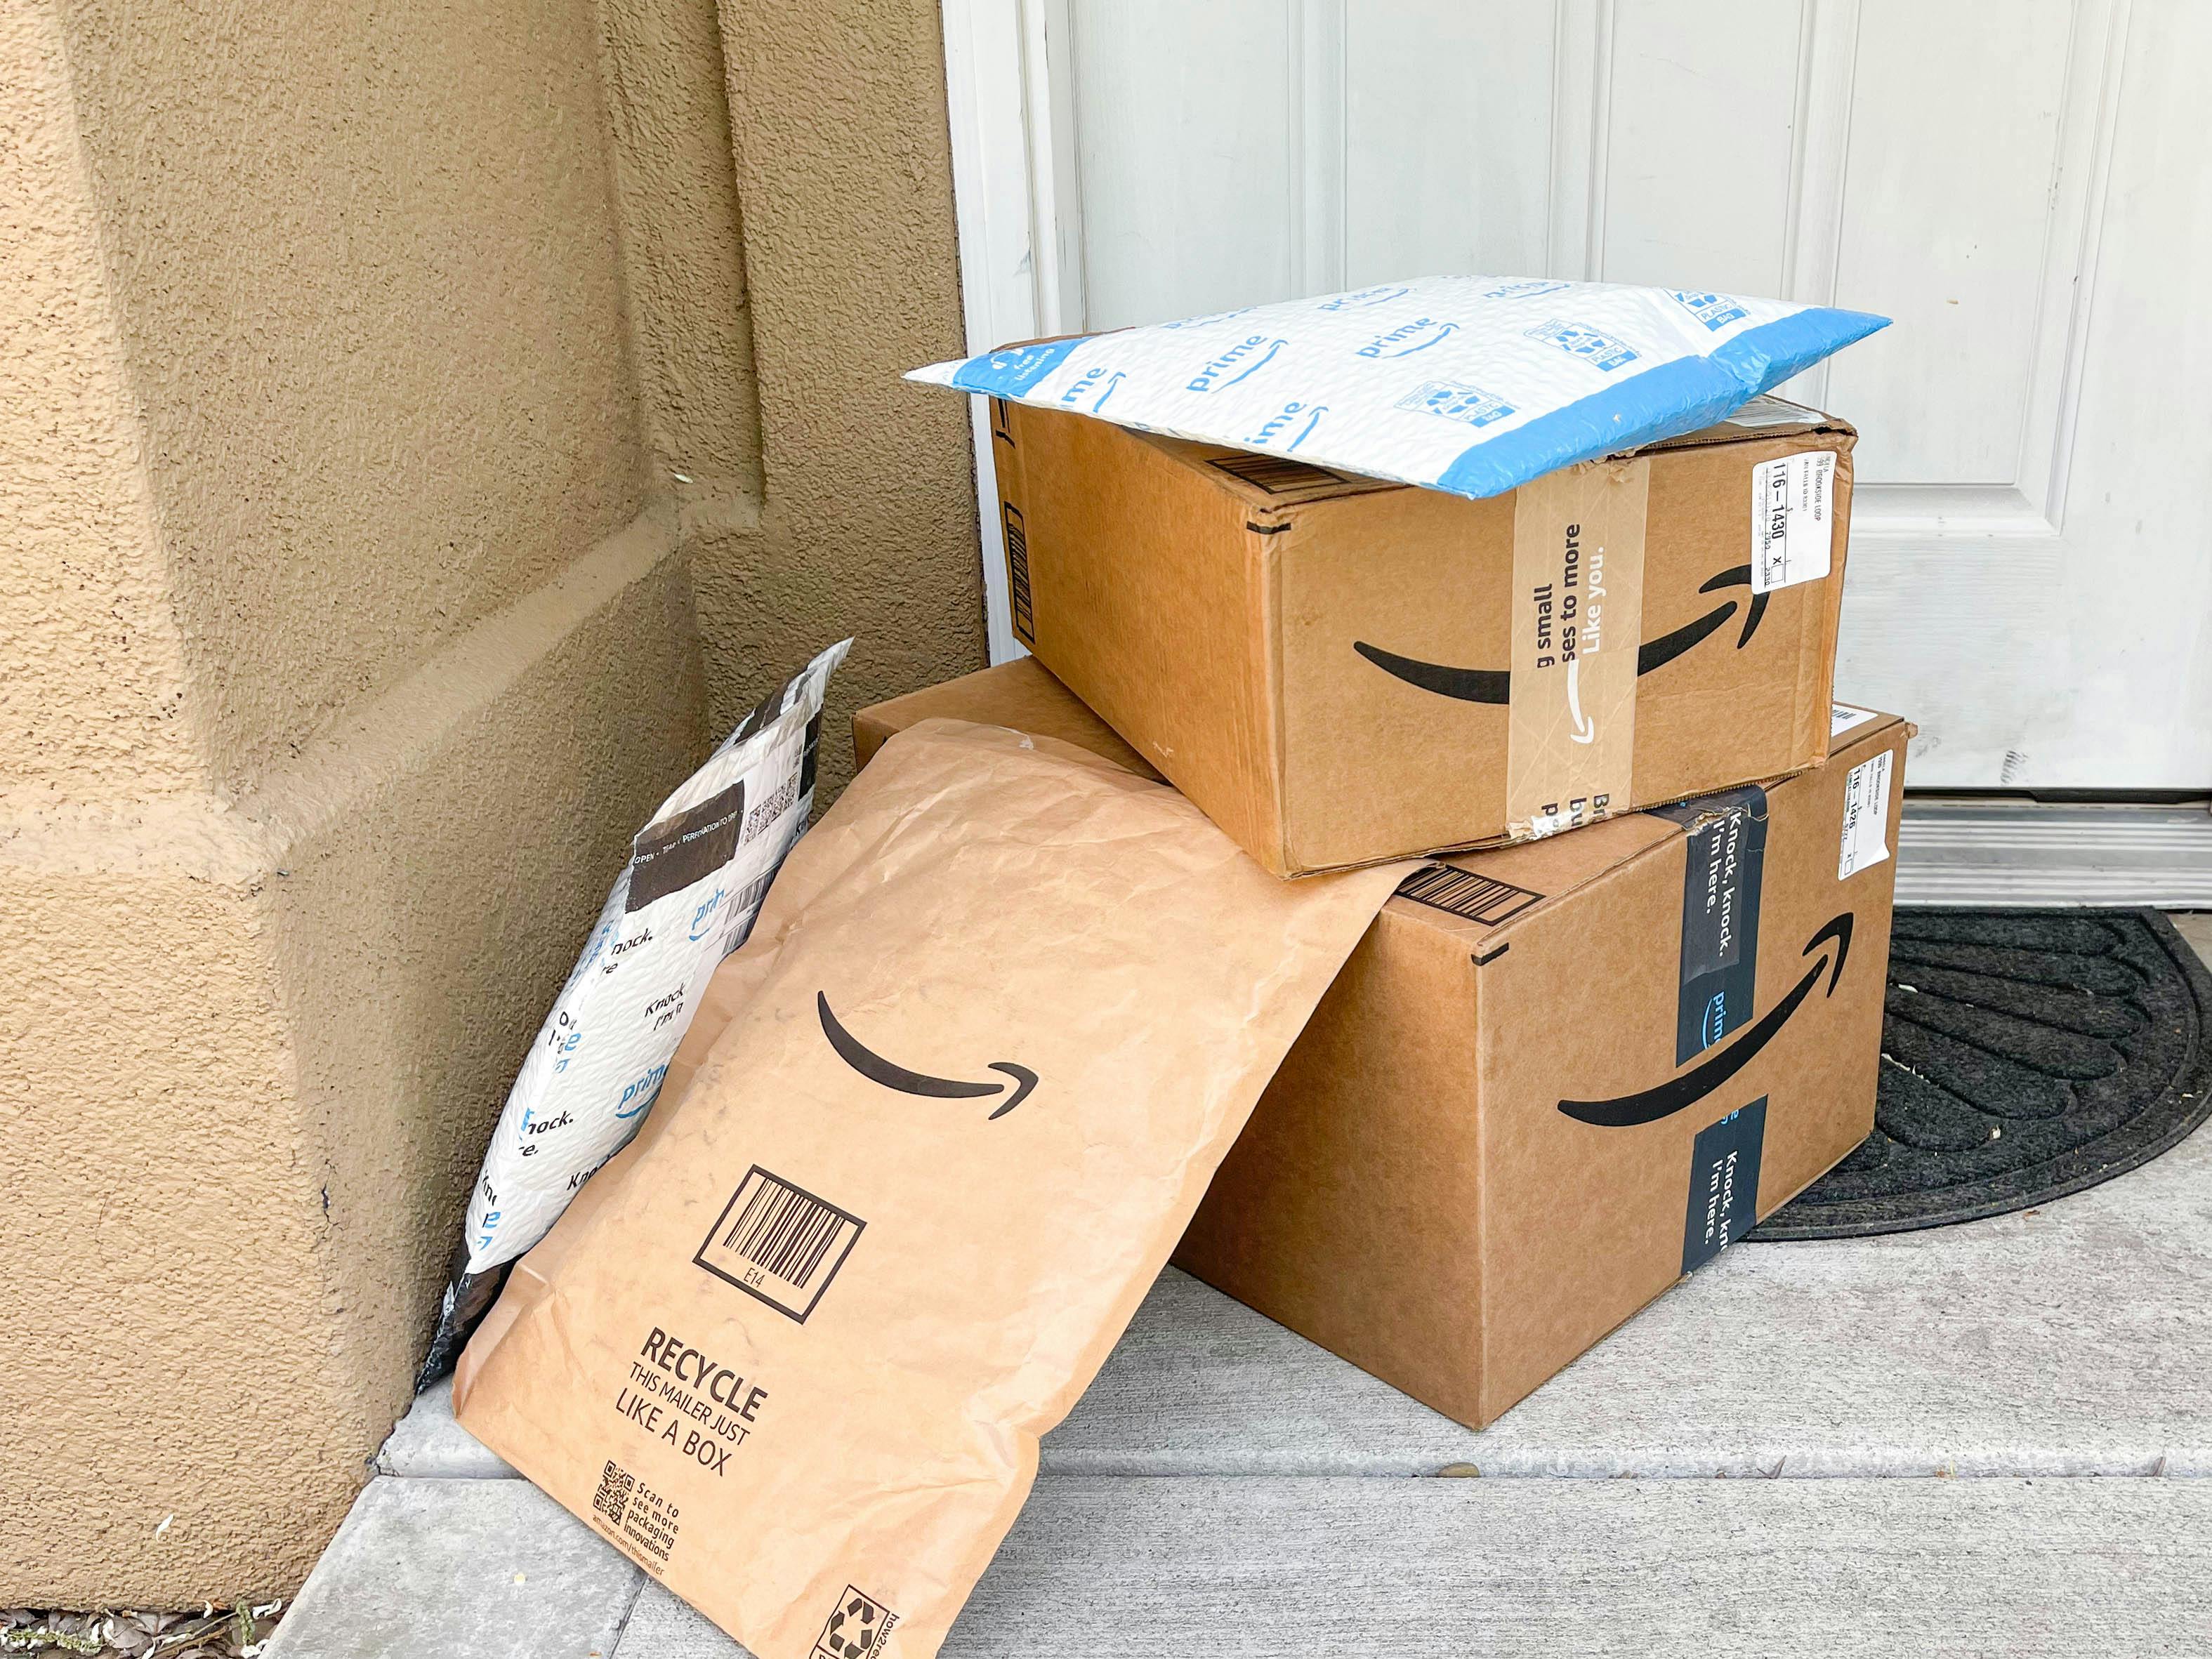 amazon packages and boxes on front porch